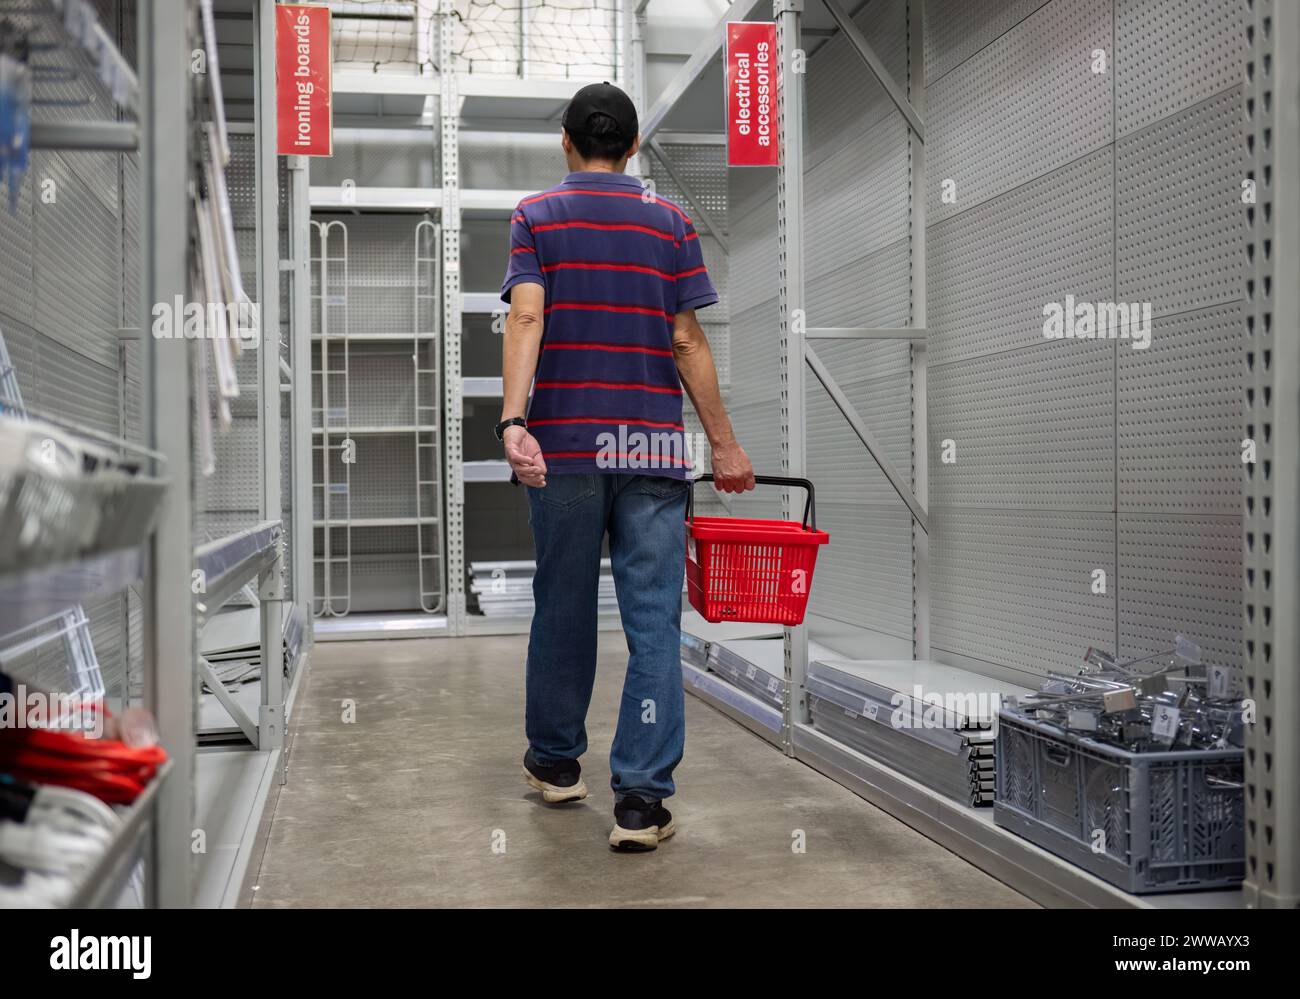 Man carrying a shopping basket, walking among the empty shelves. Stores closing down during the economic depression. Stock Photo